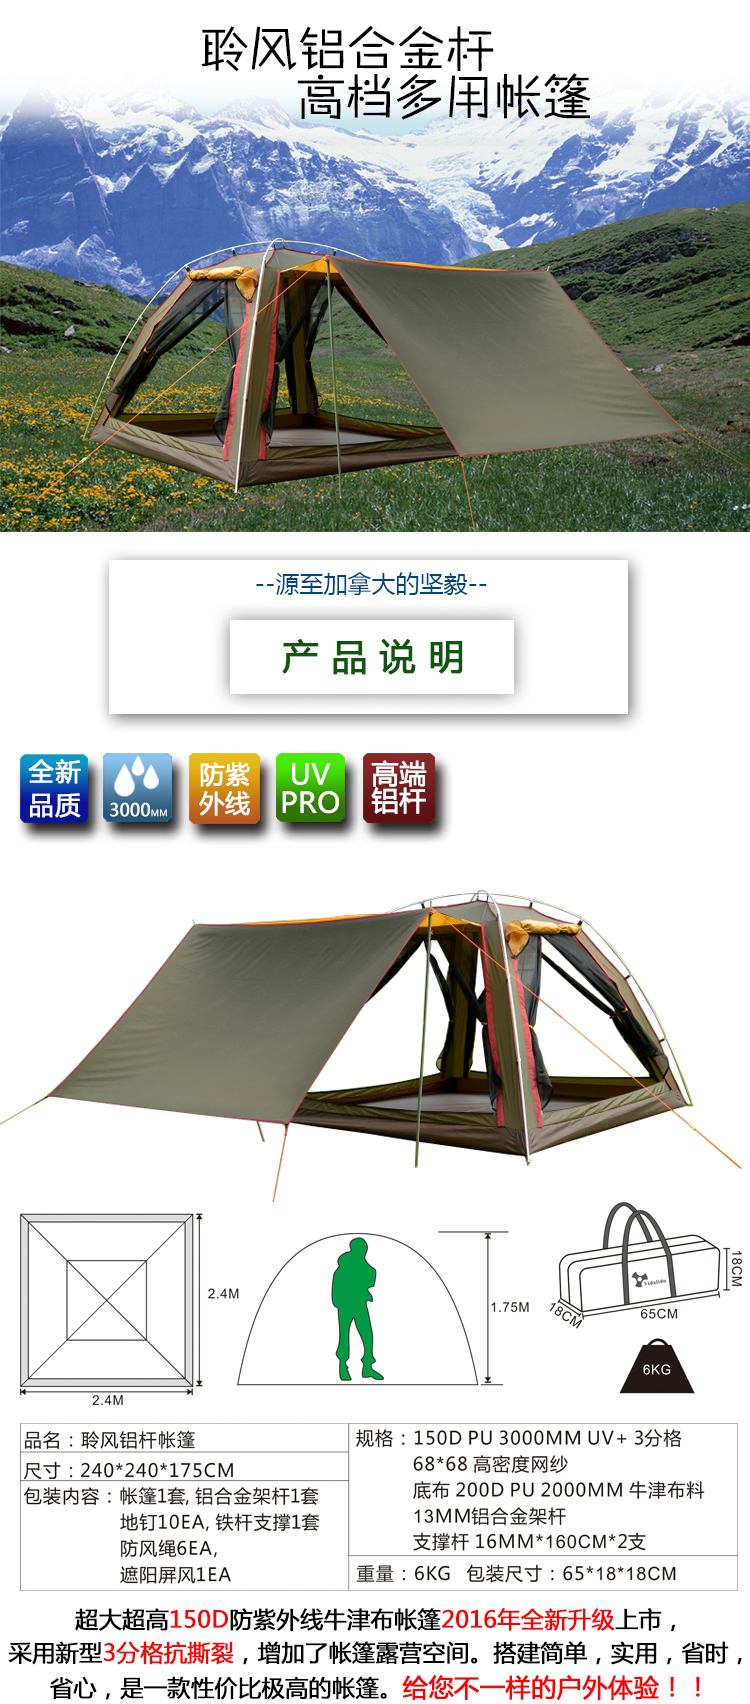 Cheap Goat Tents 2016 New style 3 4 person ultralarge aluminium poles Anti UV waterproof windproof camping tent sun shelter Tents